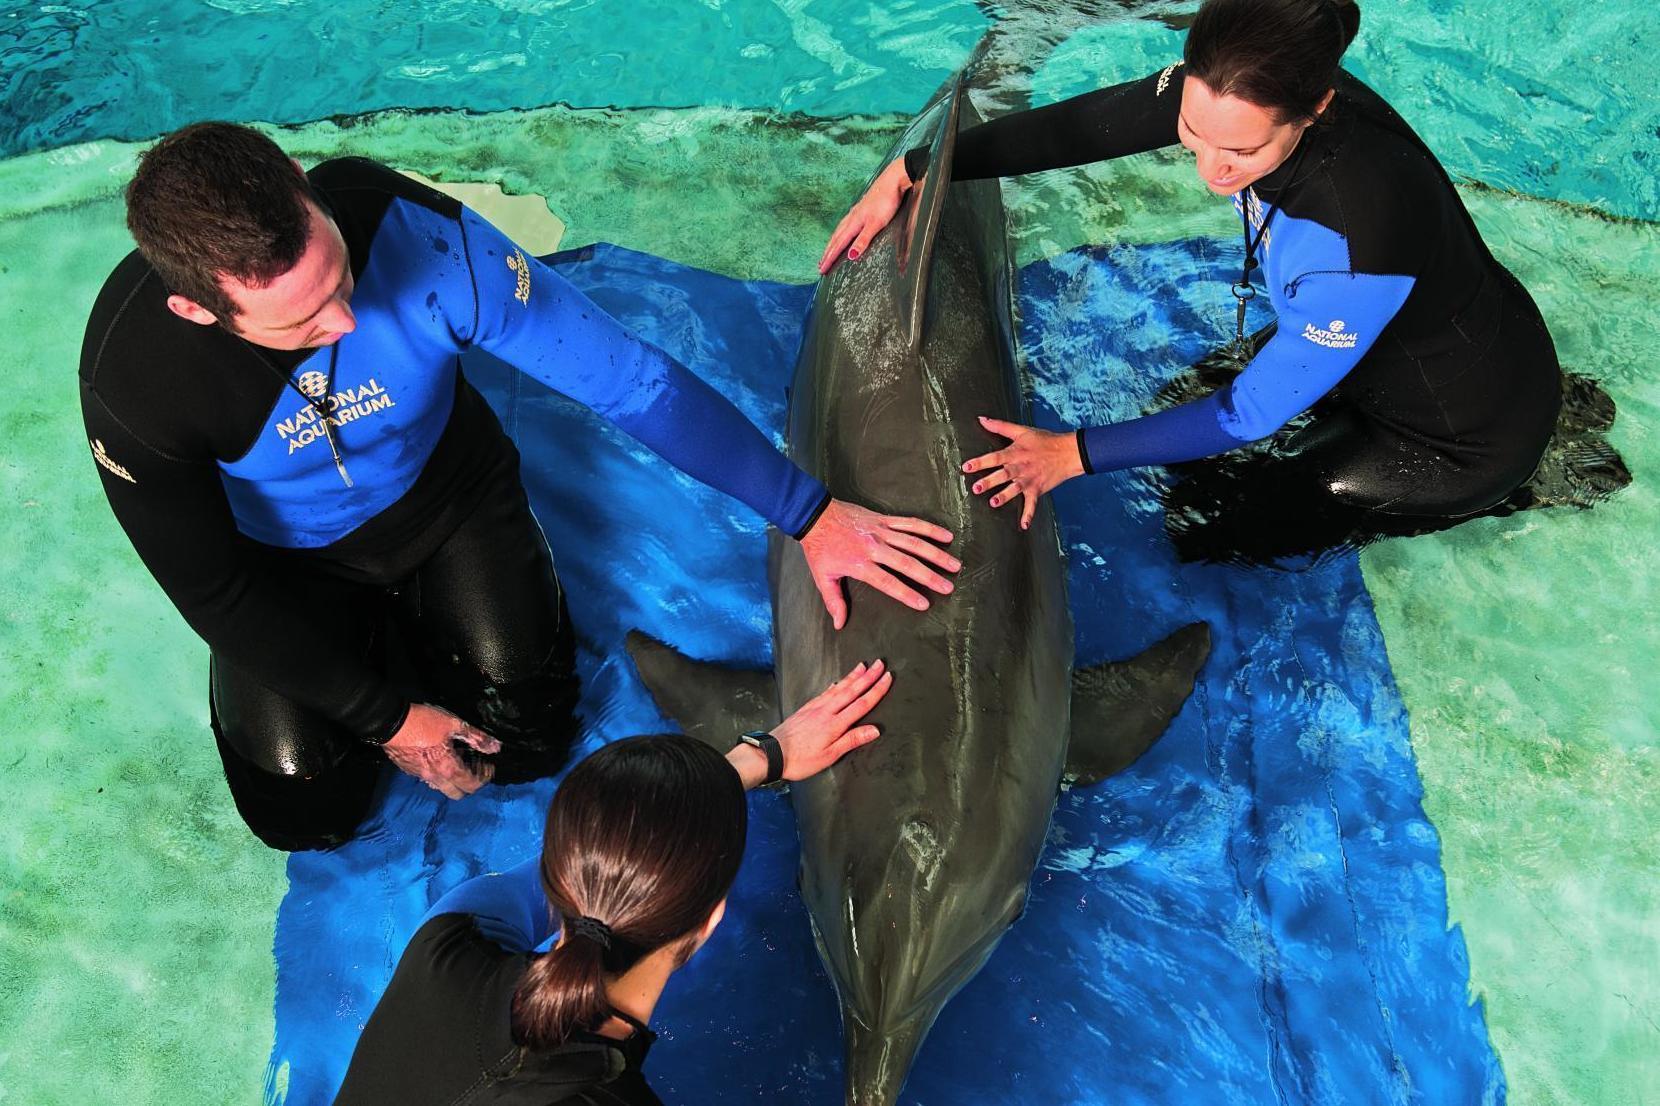 A dolphin undergoing stretcher training to prepare it for transportation